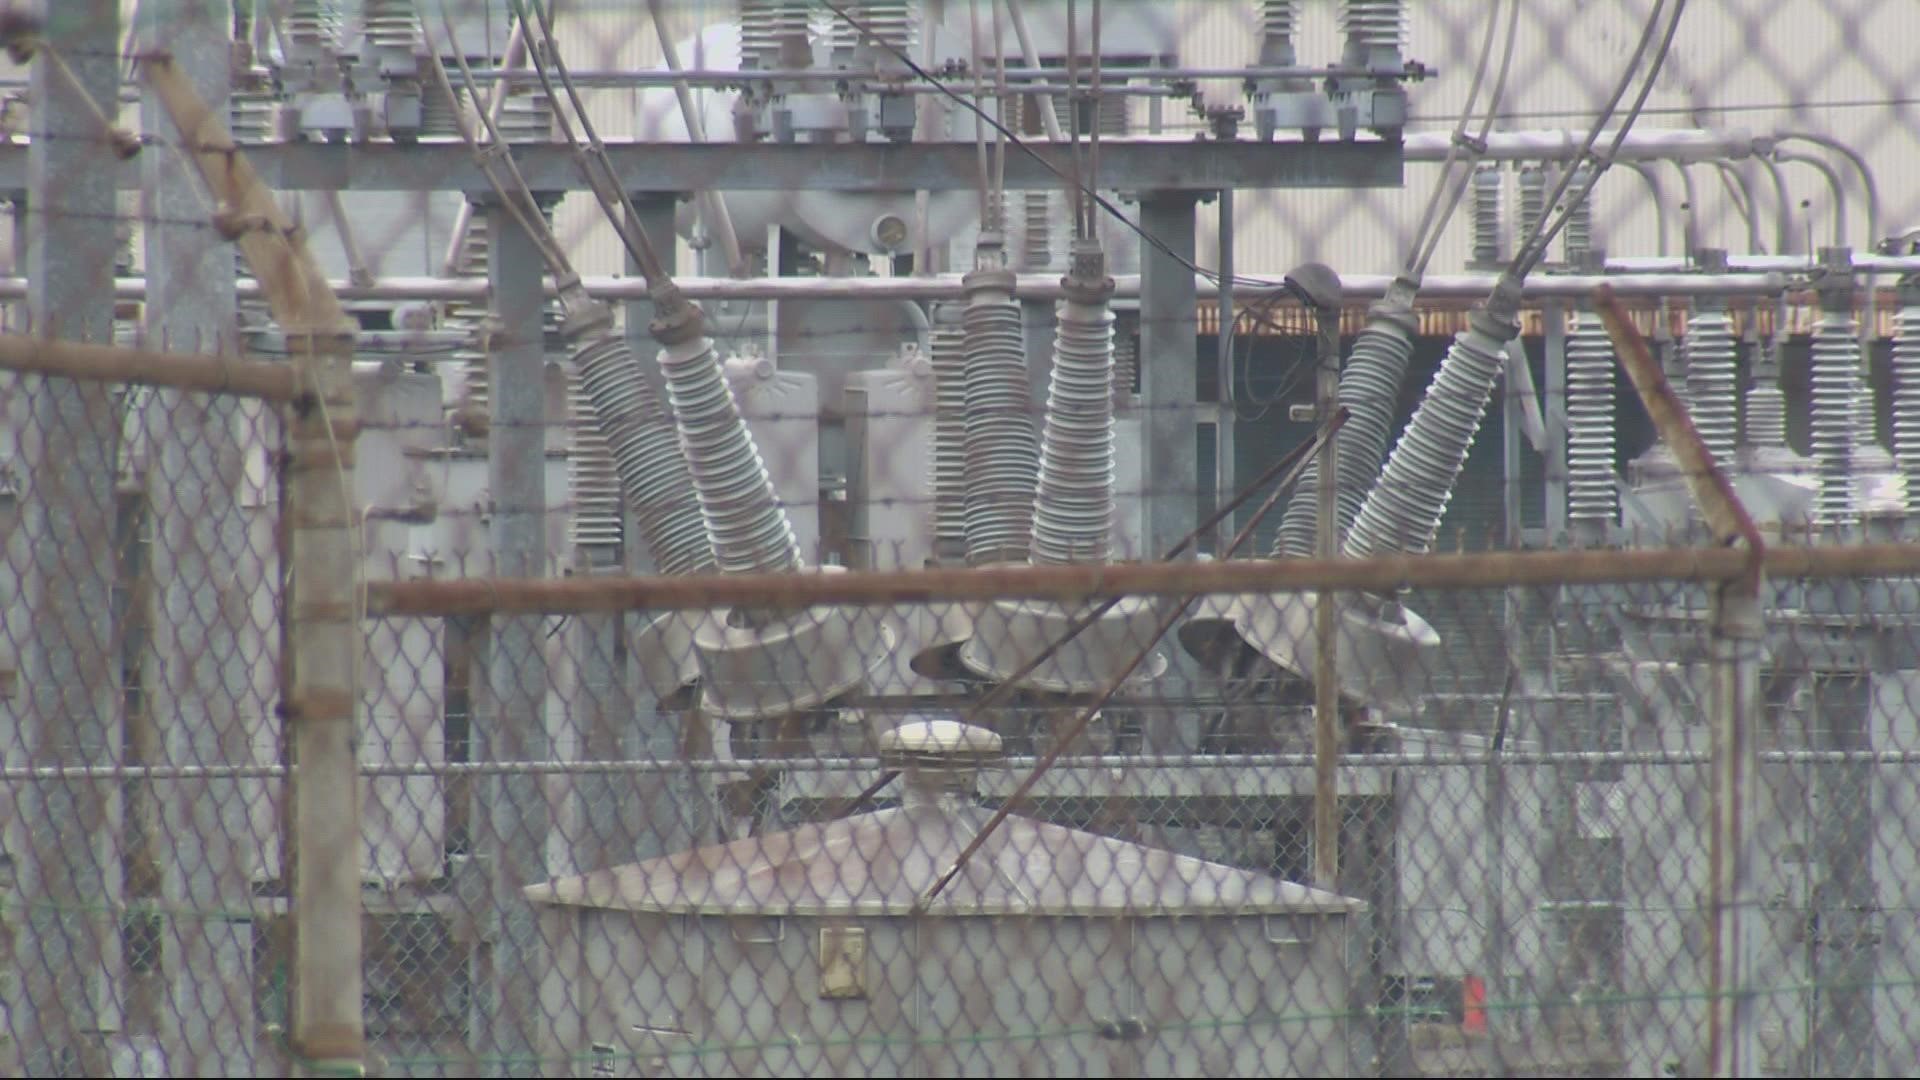 The memo suggests that power companies have reported physical attacks on substations using tools, arson, firearms and metal chains